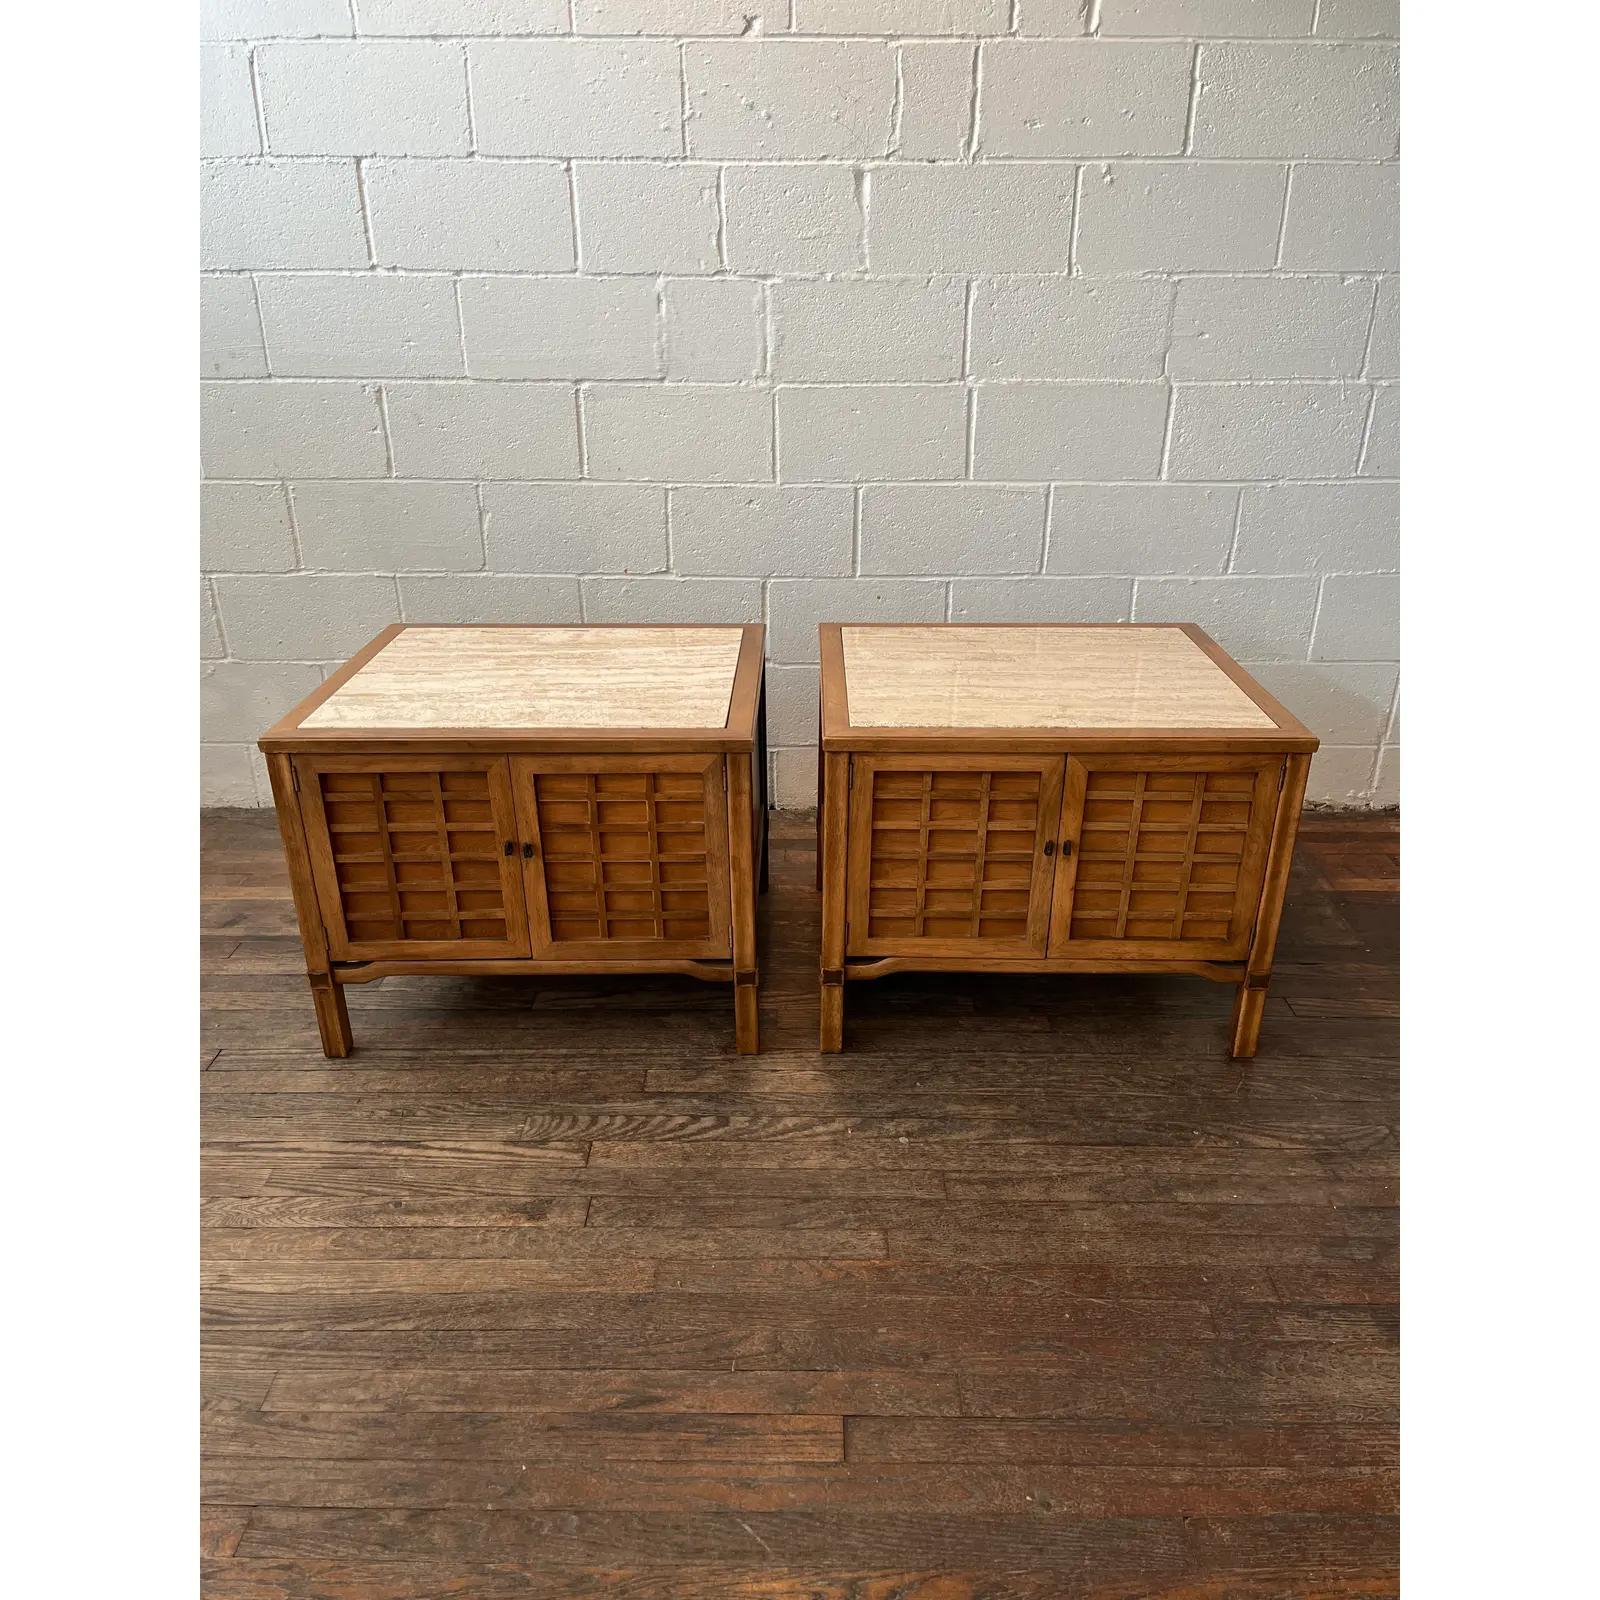 Beautiful pair of sophisticated end tables in the manner of Tomlinson. Great double door grid fronts. Large Travertine tops. Tons of storage.
Curbside to NYC/Philly $300